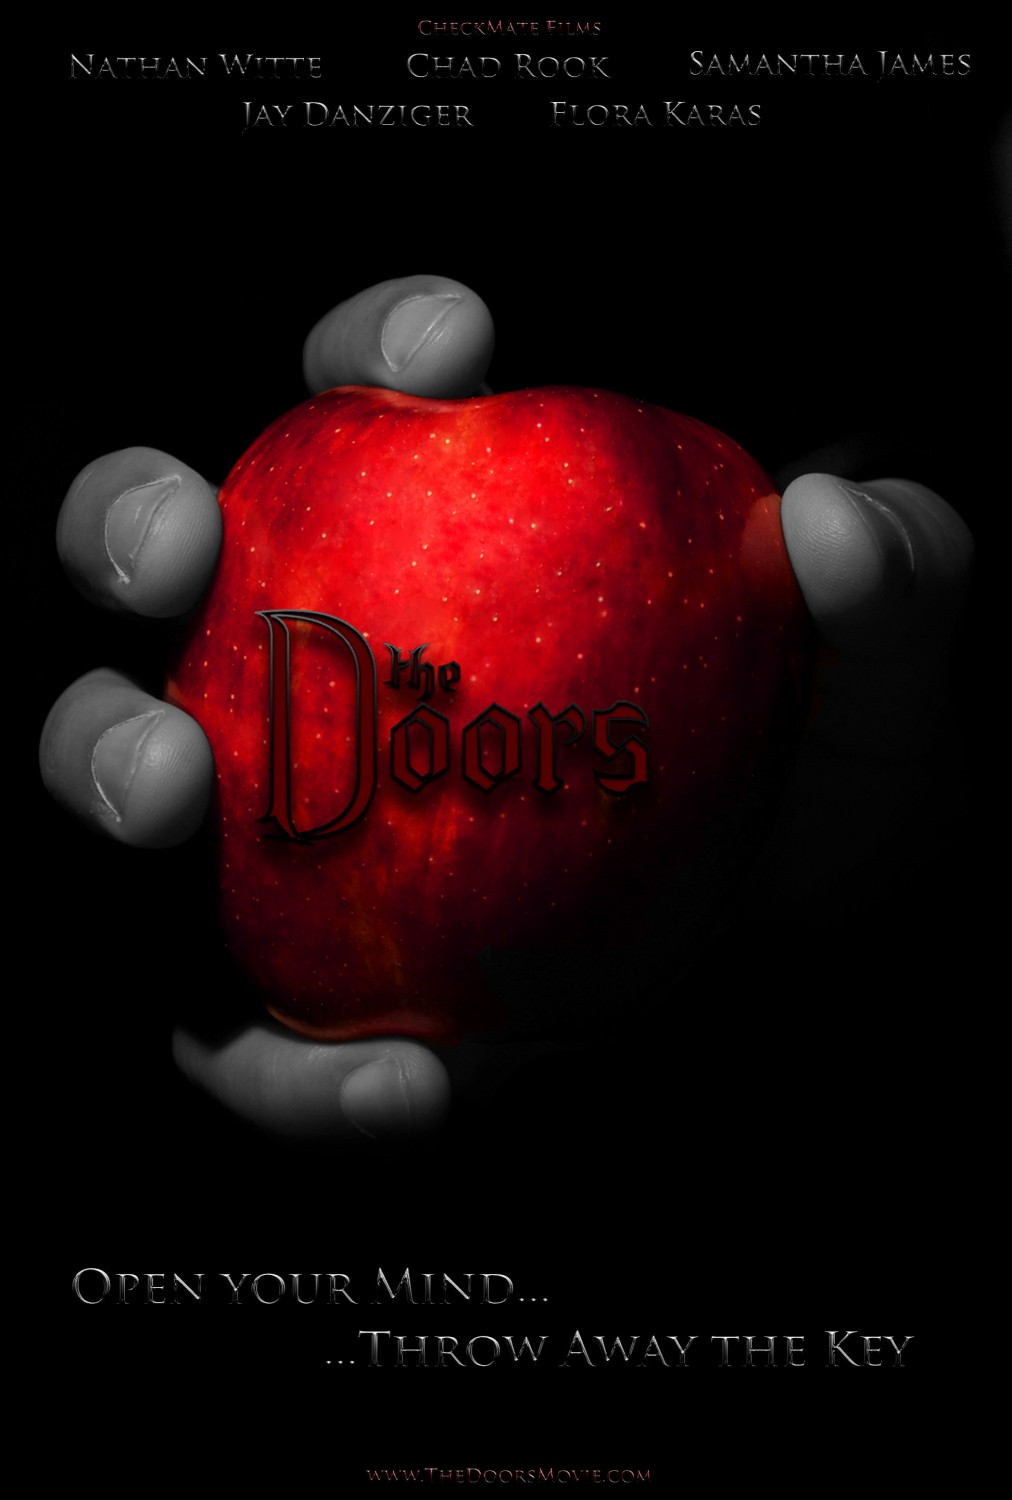 Extra Large Movie Poster Image for The Doors